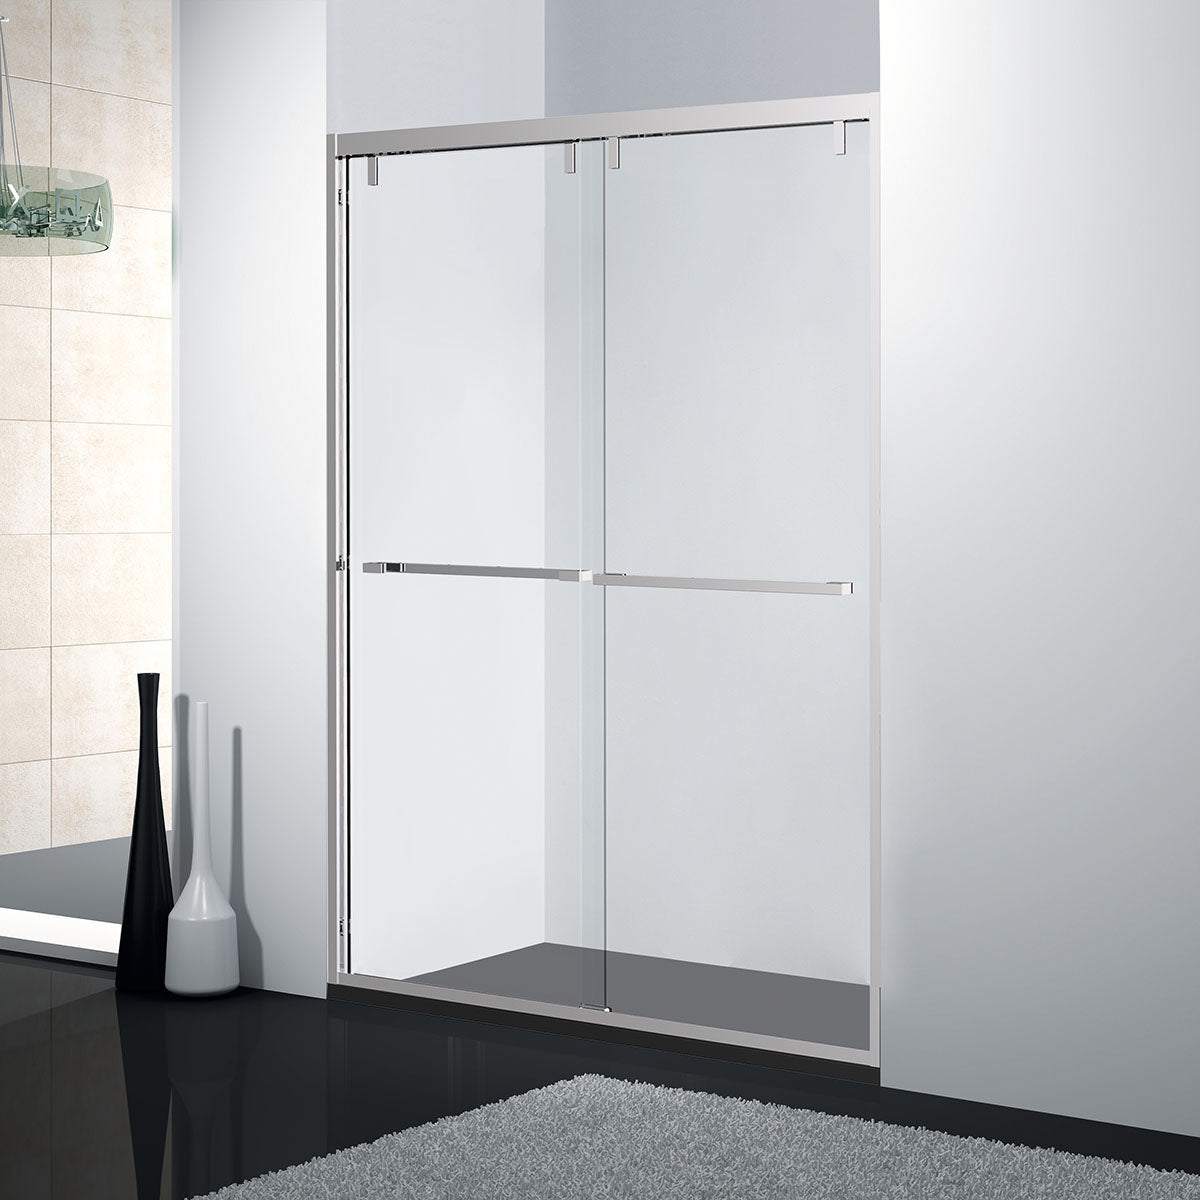 48" AC23 series Shower Door with Klearteck Treatment (3/8" Thickness) (Chrome)